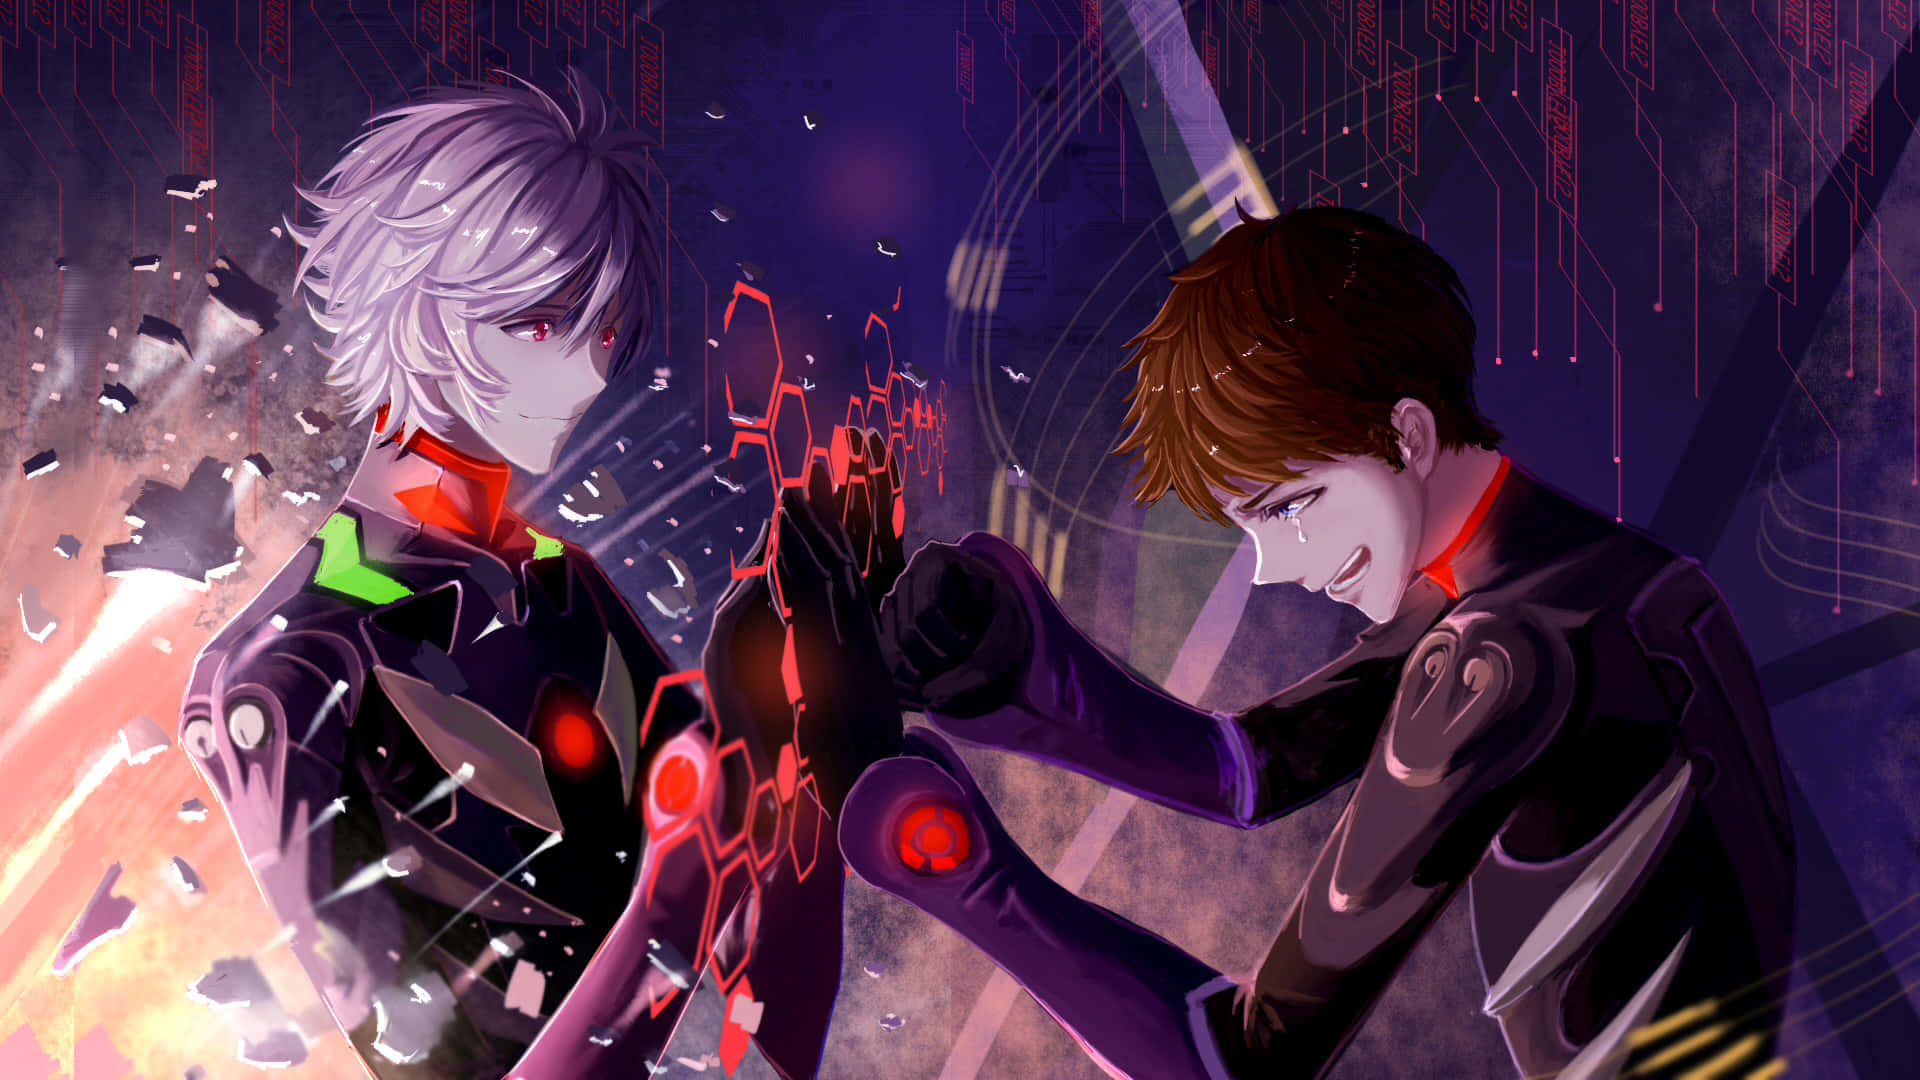 Catch the thrilling journey of Shinji and his robotic Evangelion in the manga series Wallpaper